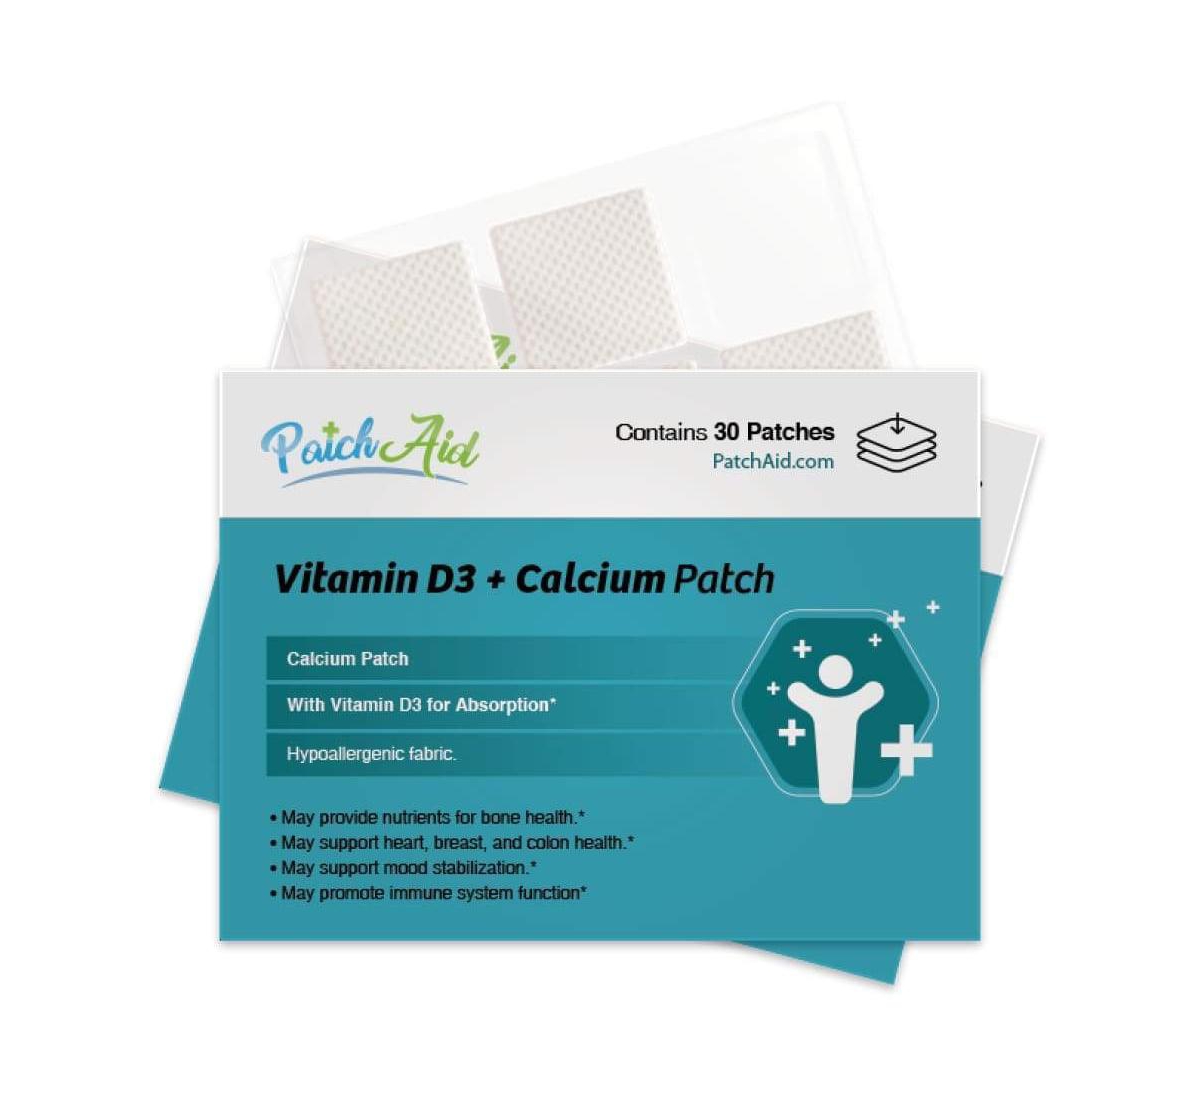 Vitamin D3 Plus Calcium Vitamin Patch by PatchAid (30-Day Supply) - White